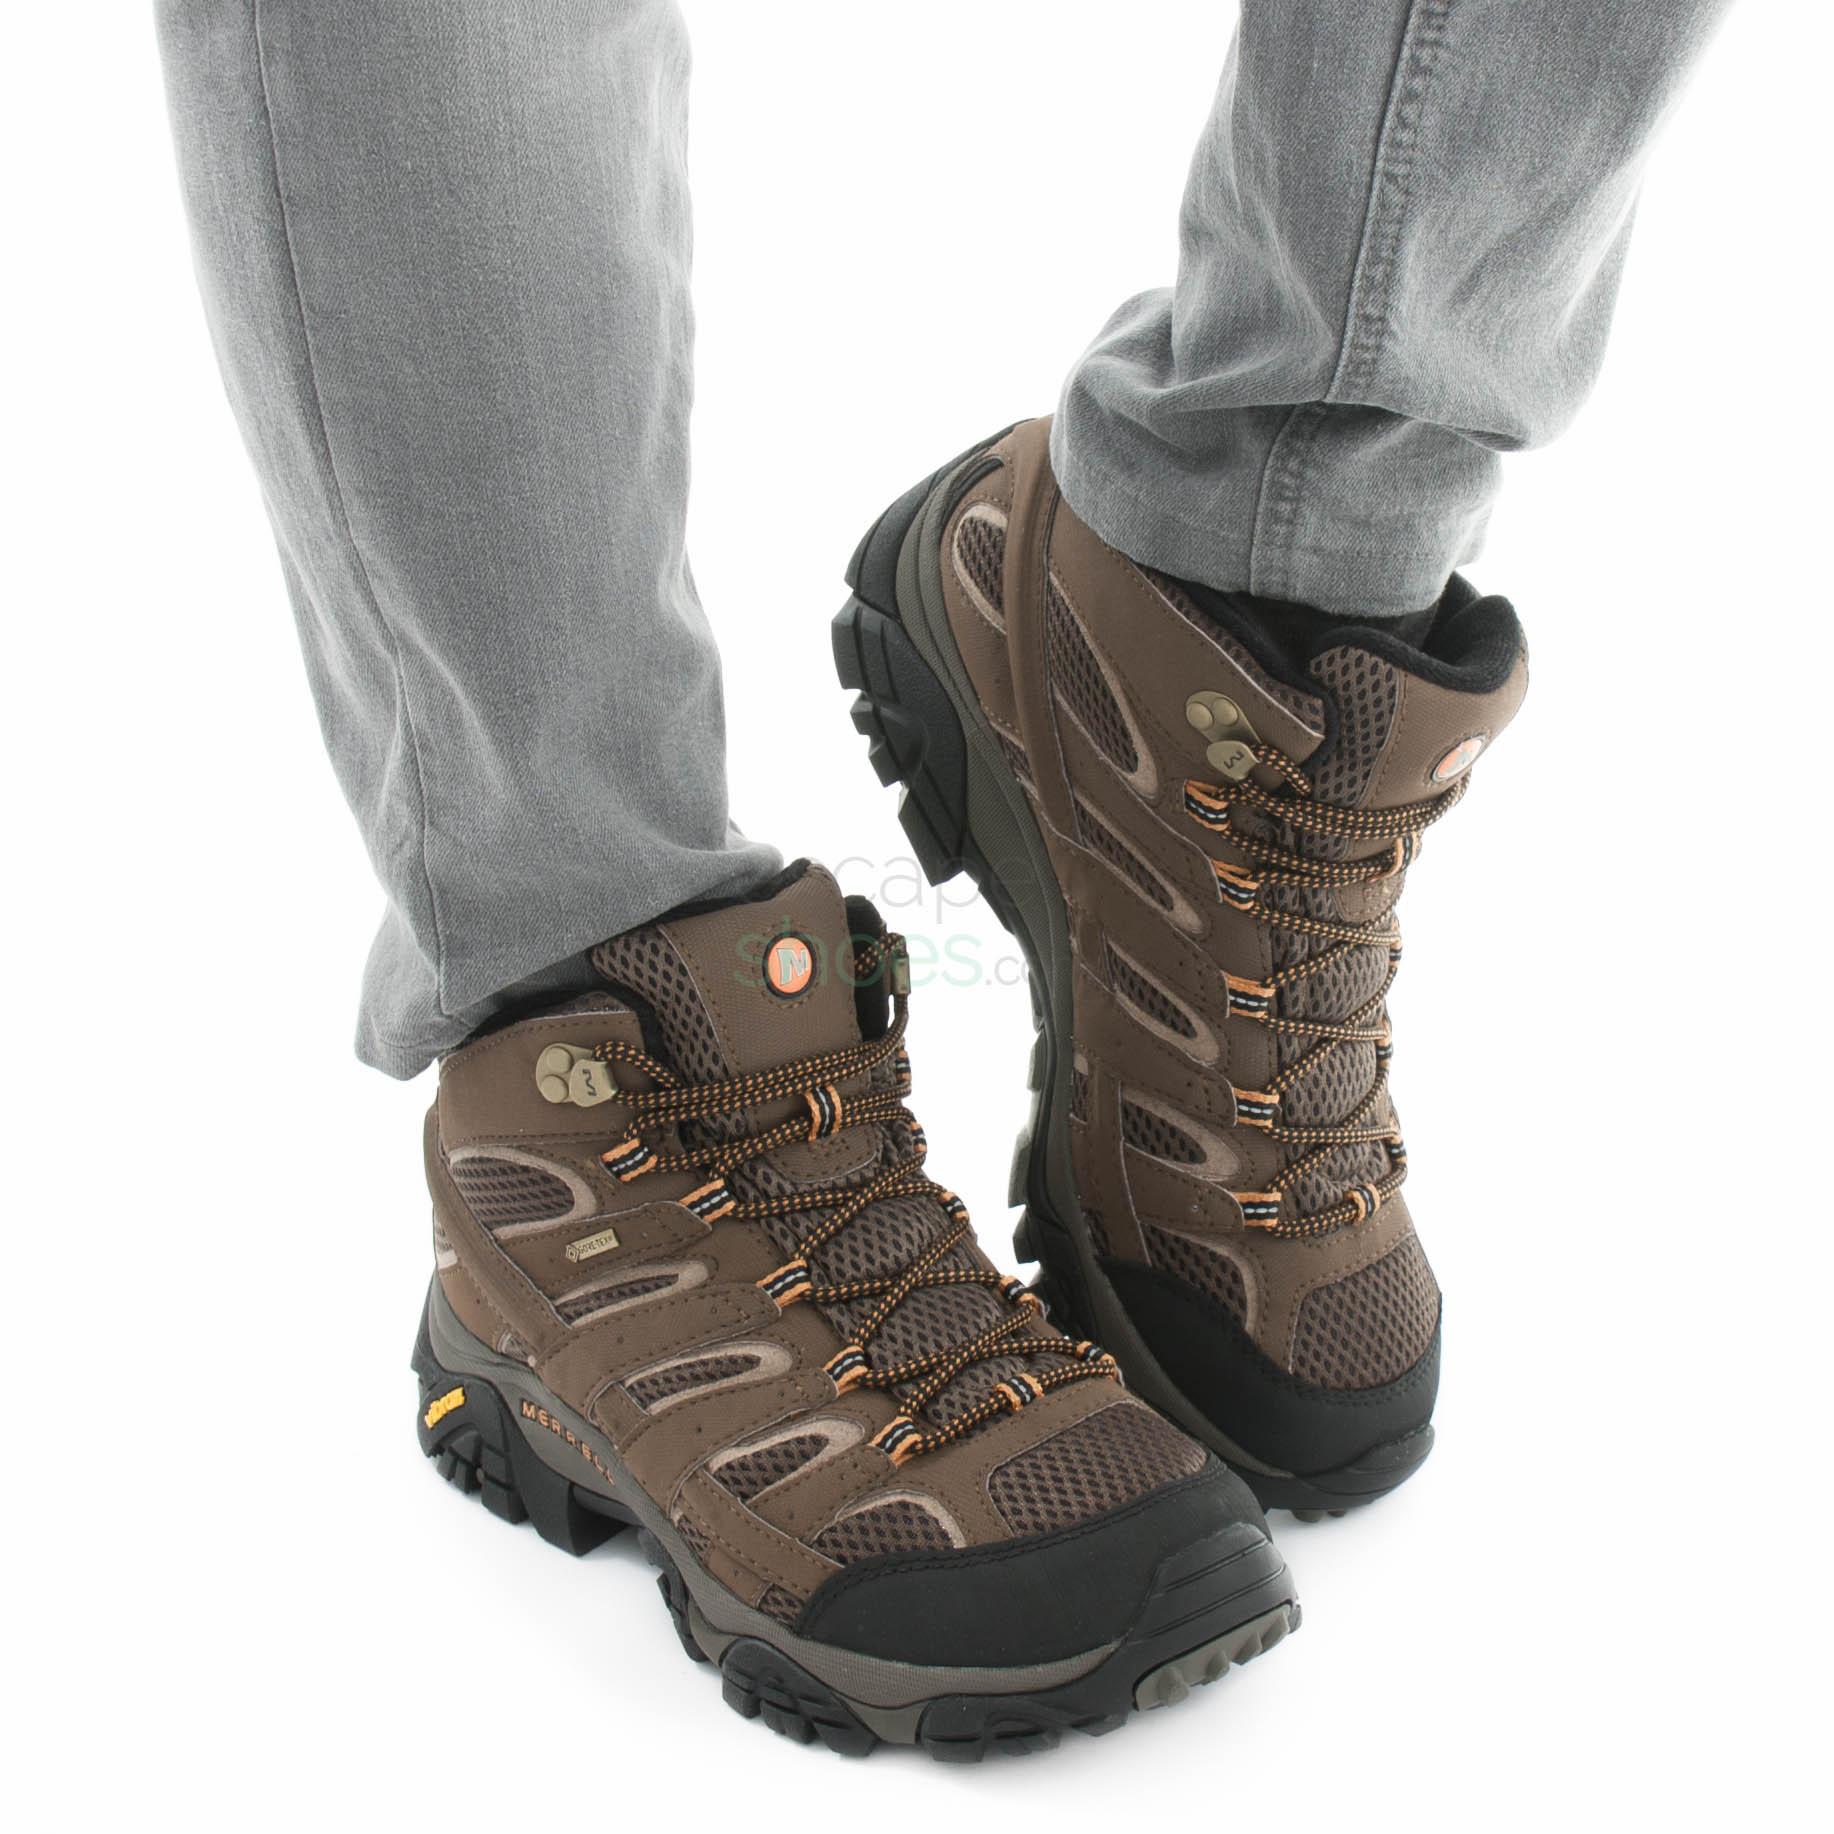 Parity Merrell Gtx Mid Up To 70 Off